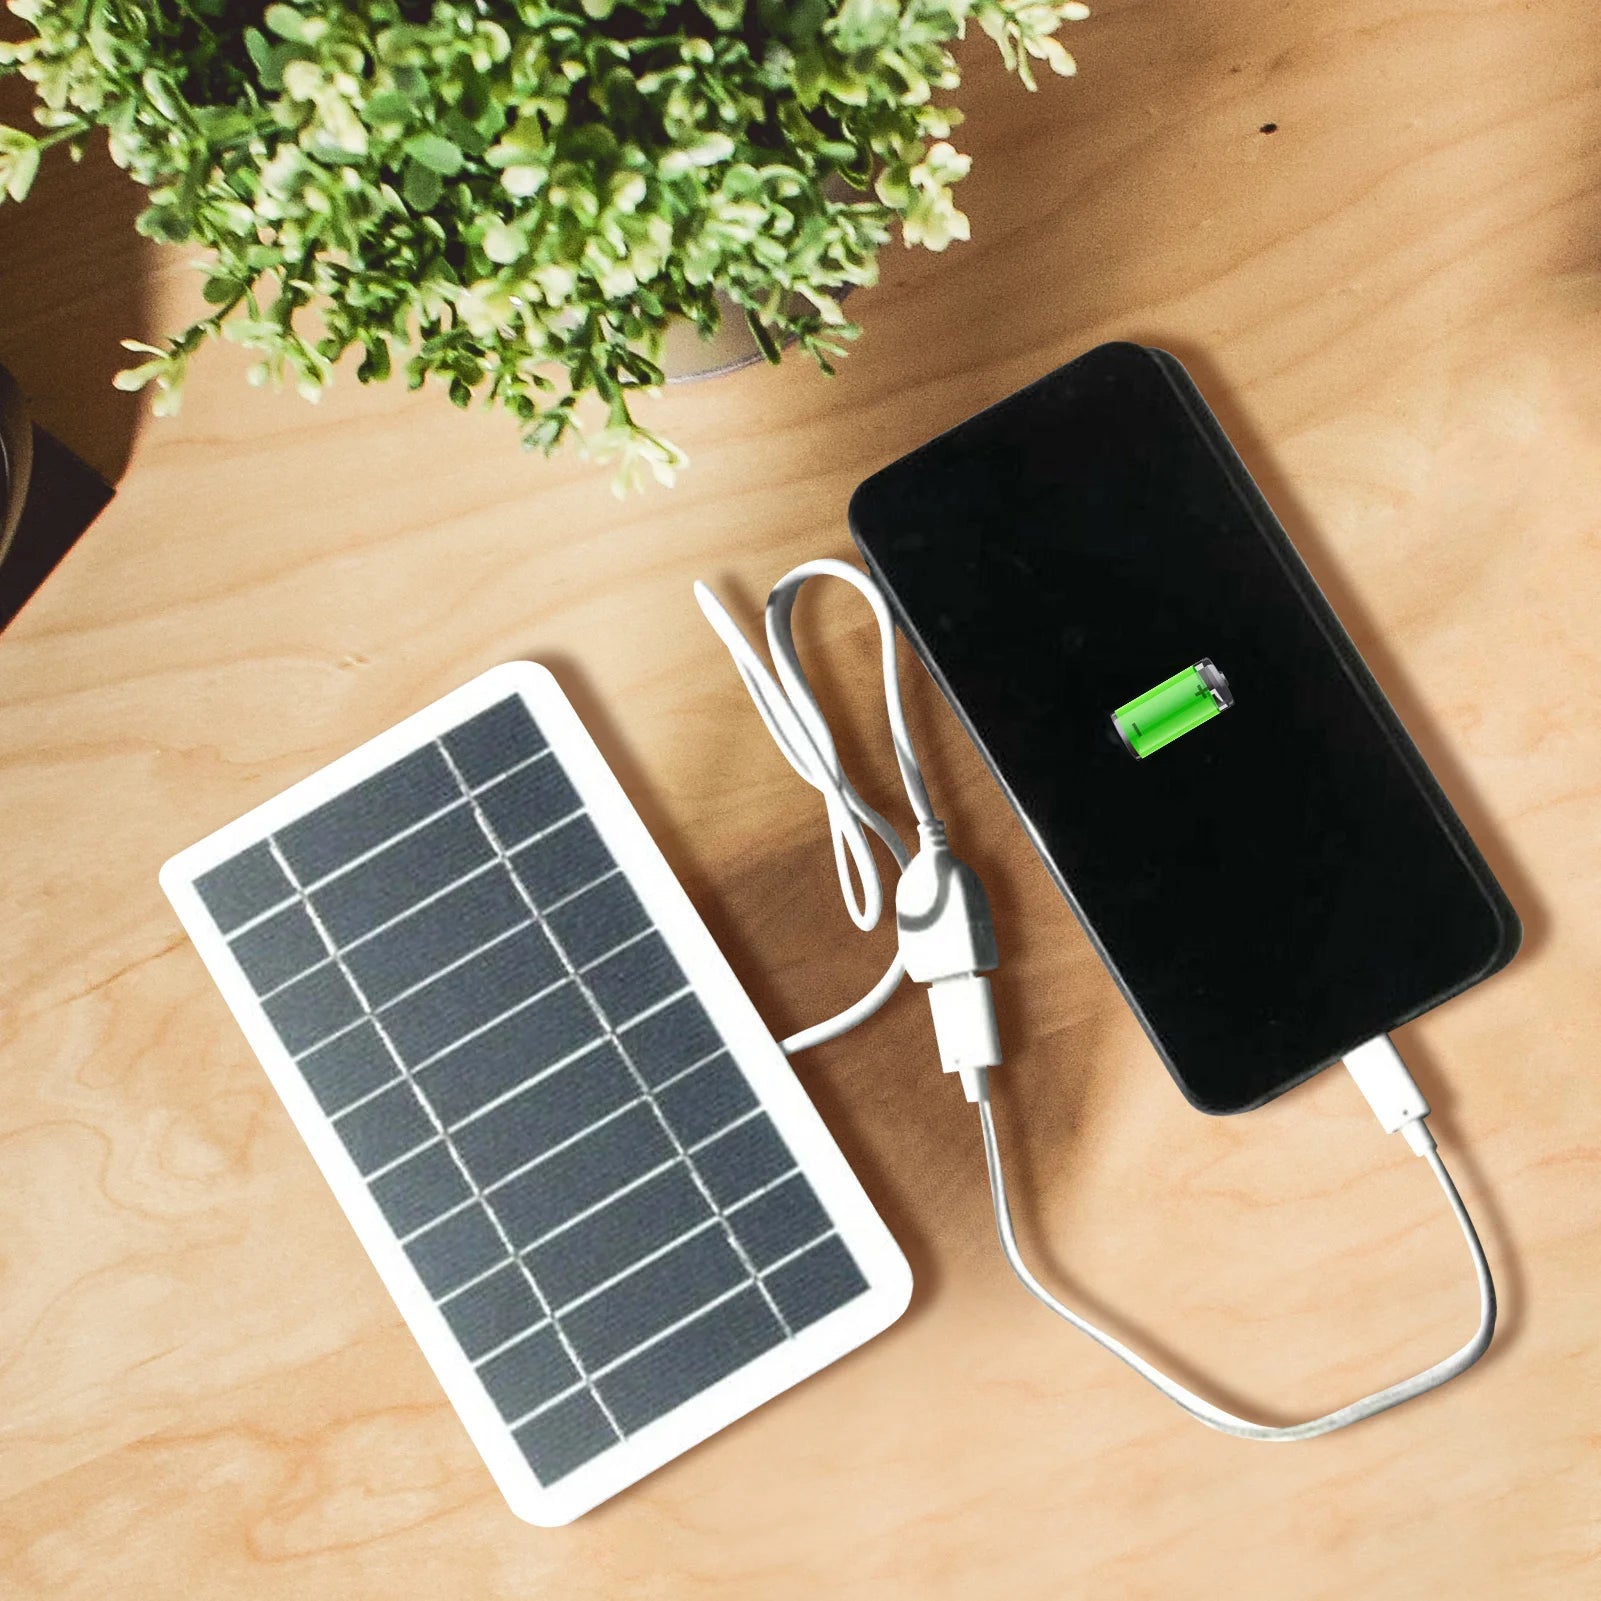 2W 5V Mini Solar Charger Panel2W 5V Mini Solar Charger PanelStay connected on-the-go with our 2W 5V Mini Solar Charger Panel. This portable and compact solar charger is perfect for outdoor enthusiasts, travelers, and DIY enthCharging CableLive Online MallLive Online Mall2W 5V Mini Solar Charger Panel